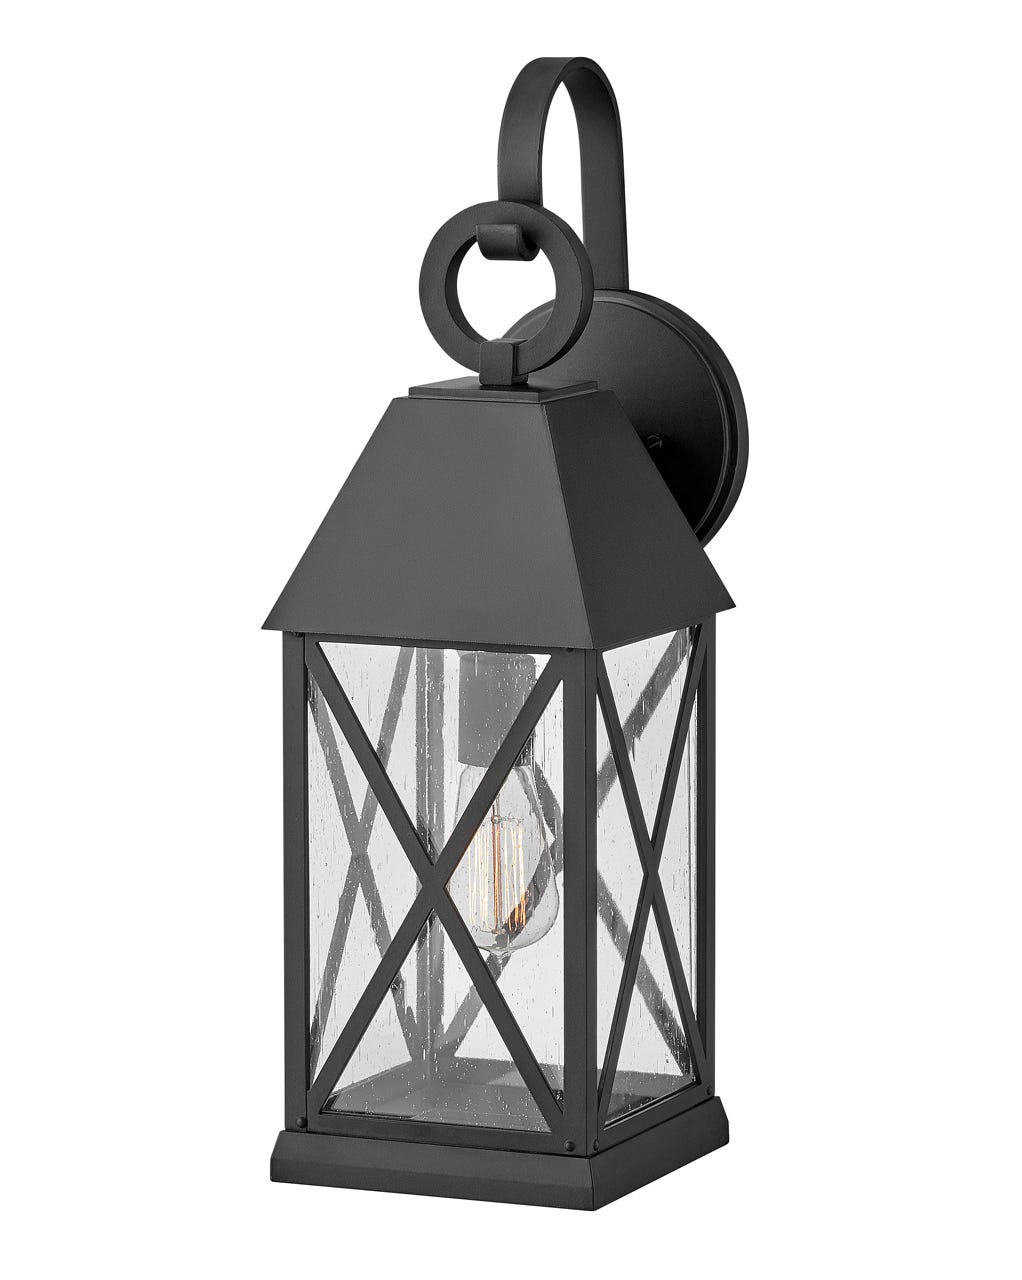 OUTDOOR BRIAR Wall Mount Lantern Outdoor l Wall Hinkley Museum Black 8.75x7.0x21.75 